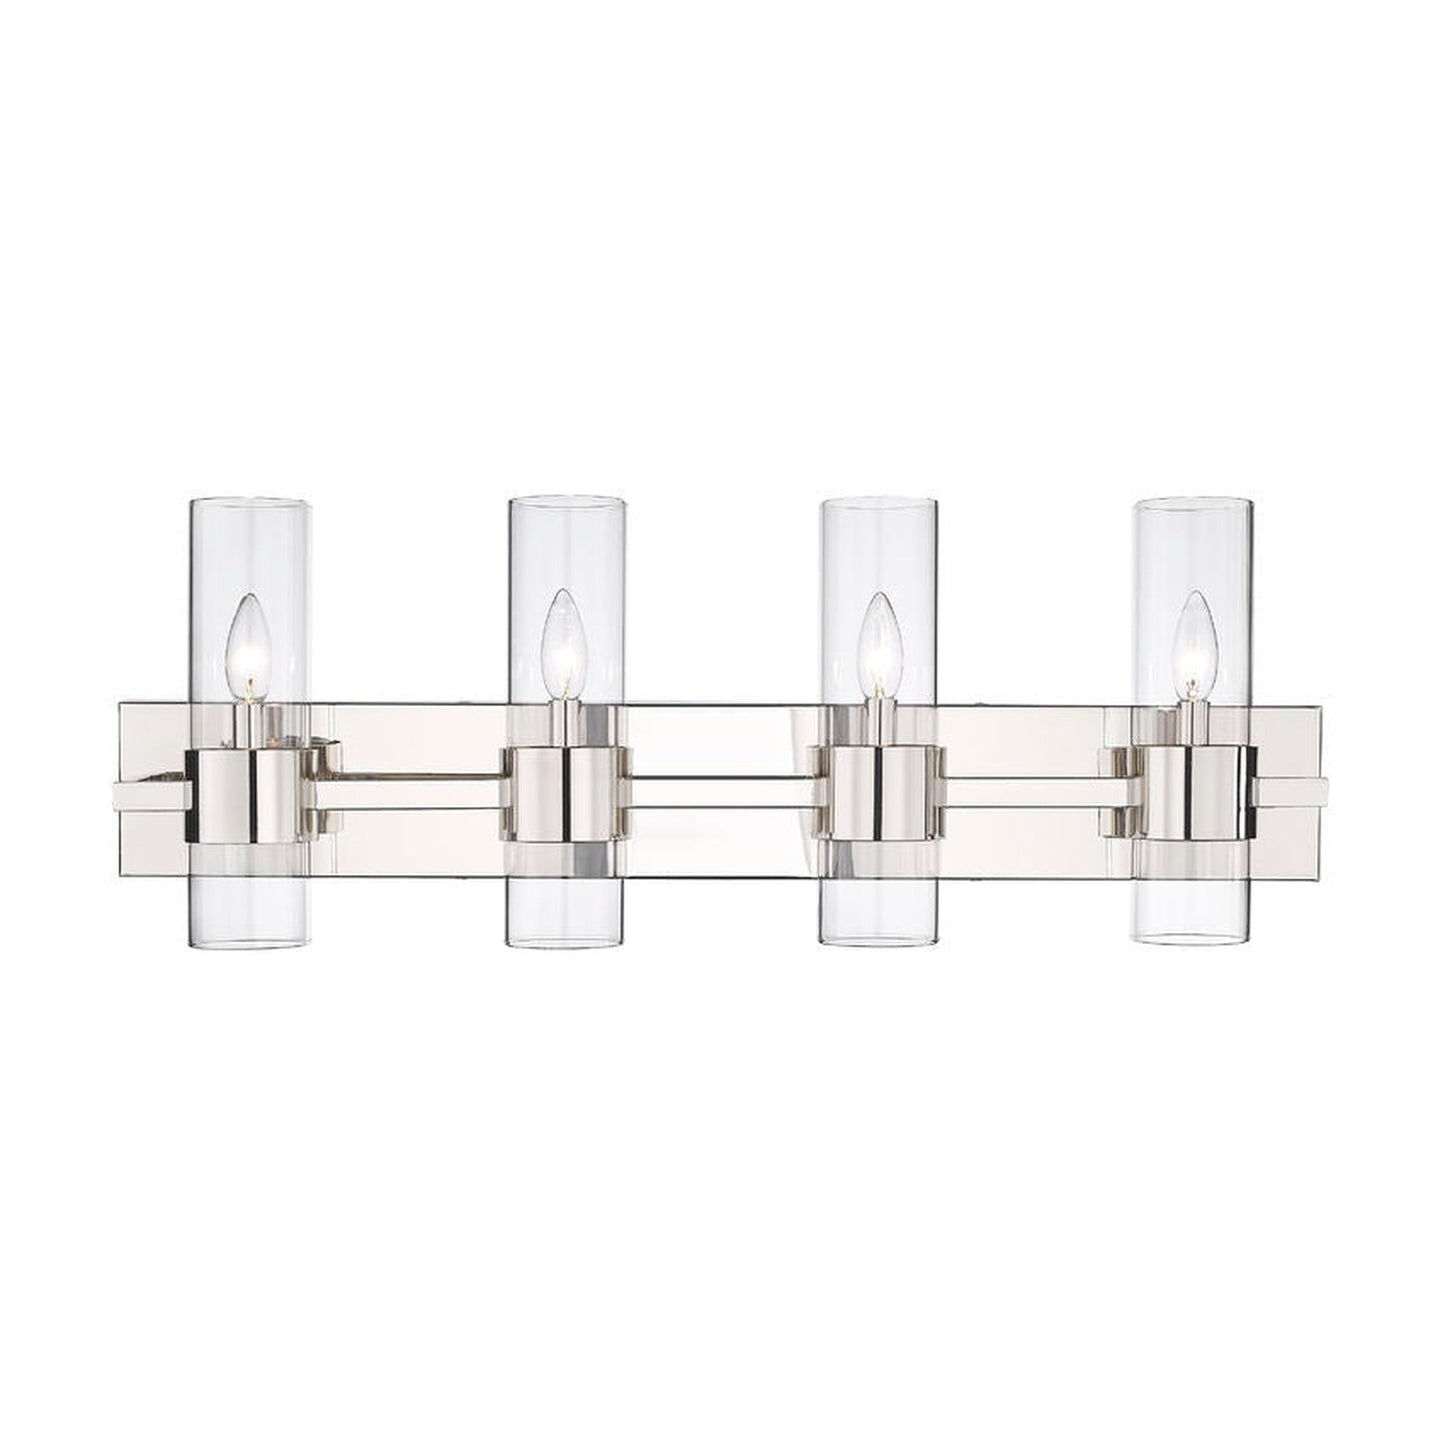 Z-Lite Lawson 32" 4-Light Polished Nickel Vanity Light With Clear Glass Shade